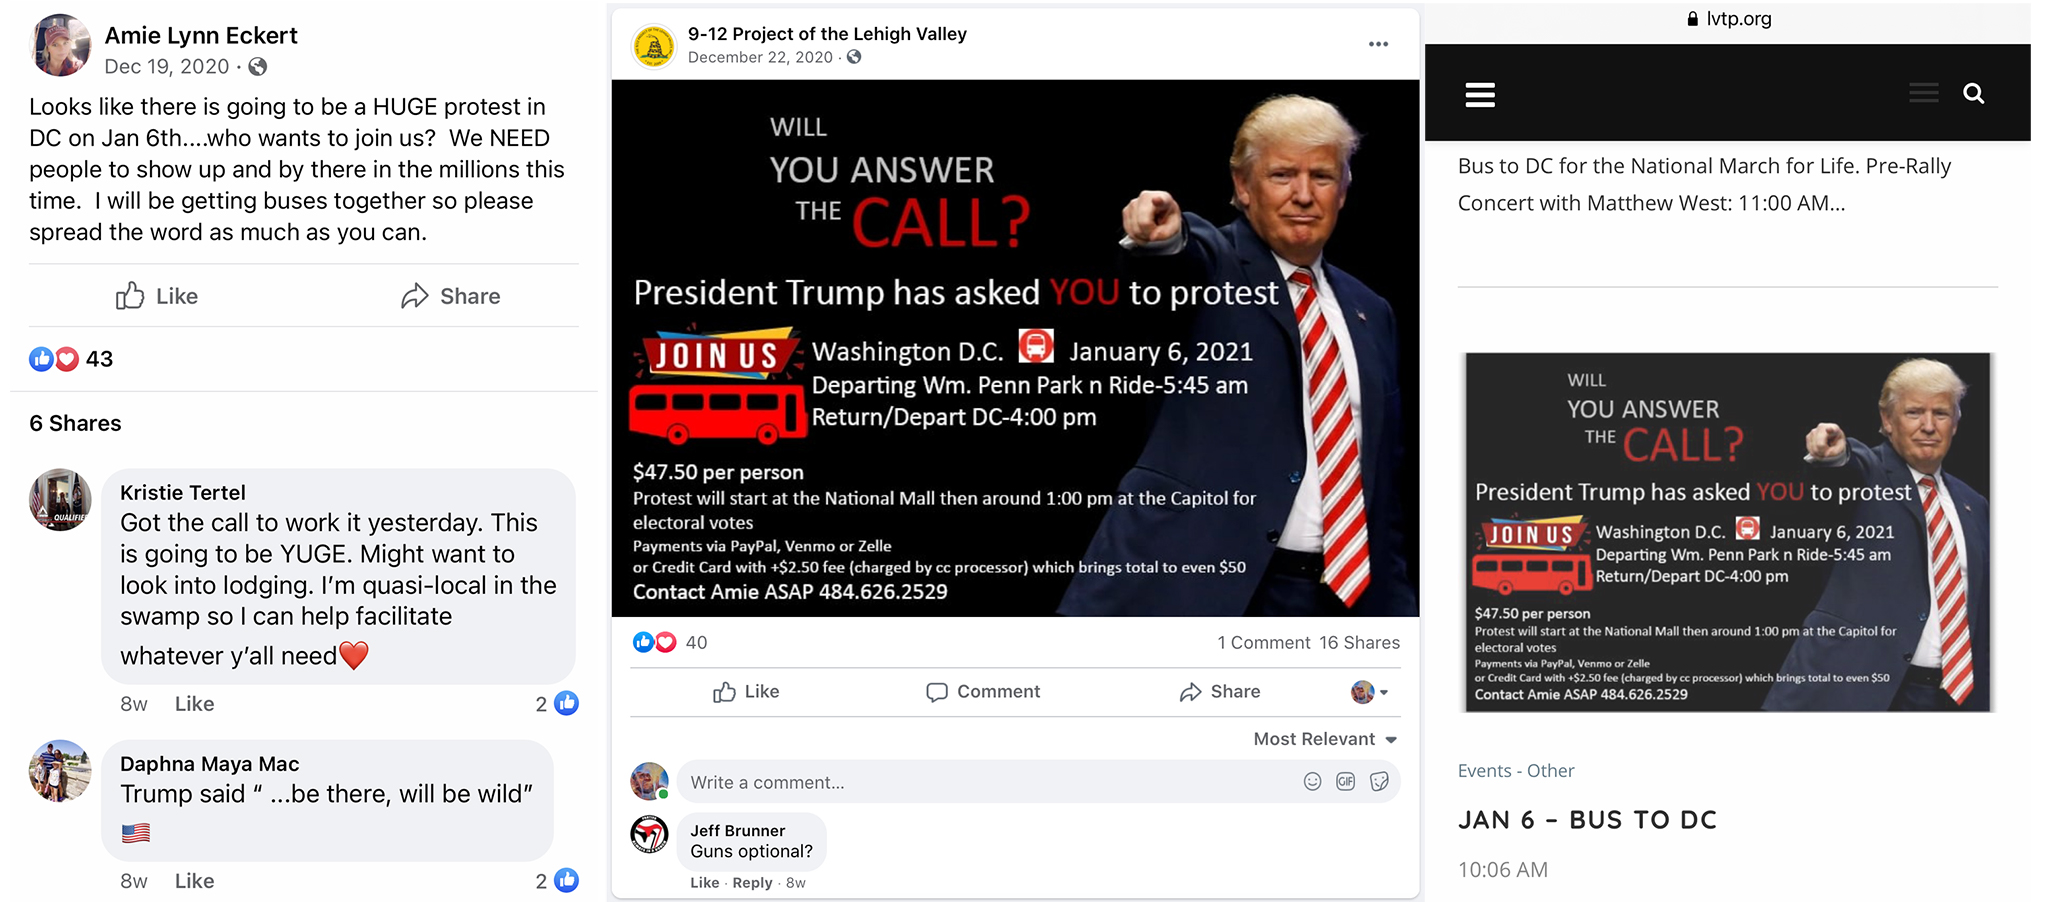 On the left, a screencap from Amie Eckert's Facebook profile imploring her followers to join her bus charter to DC on January 6th. In the middle, a screencap from the LVTP's Facebook account a flyer advertising this bus trip. On the right, a screencap from LVTP's website advertising the same bus trip.